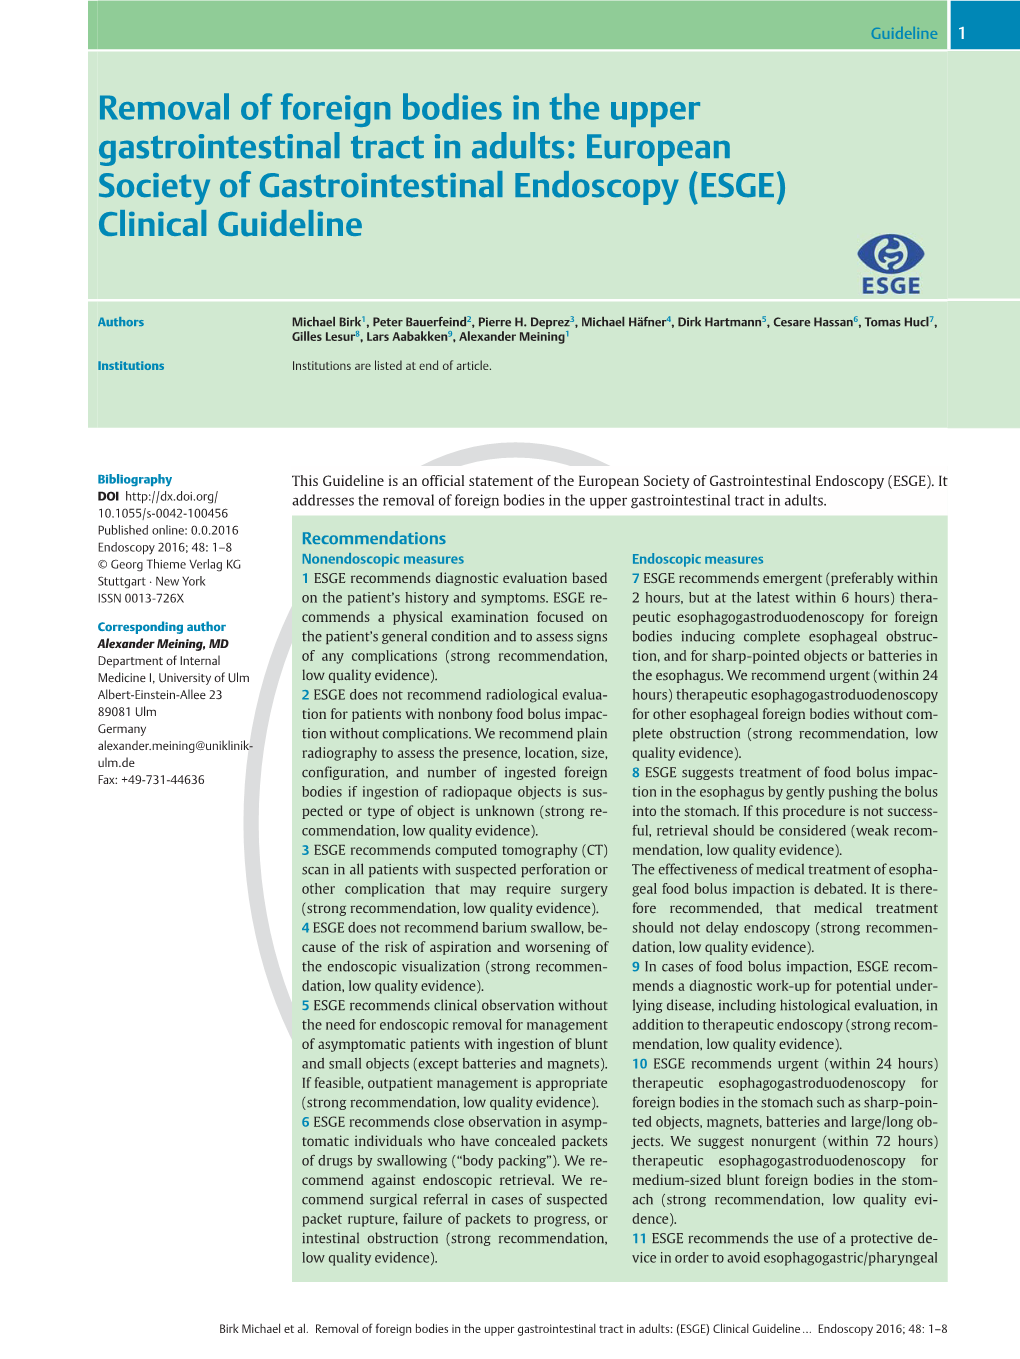 Removal of Foreign Bodies in the Upper Gastrointestinal Tract in Adults: European Society of Gastrointestinal Endoscopy (ESGE) Clinical Guideline